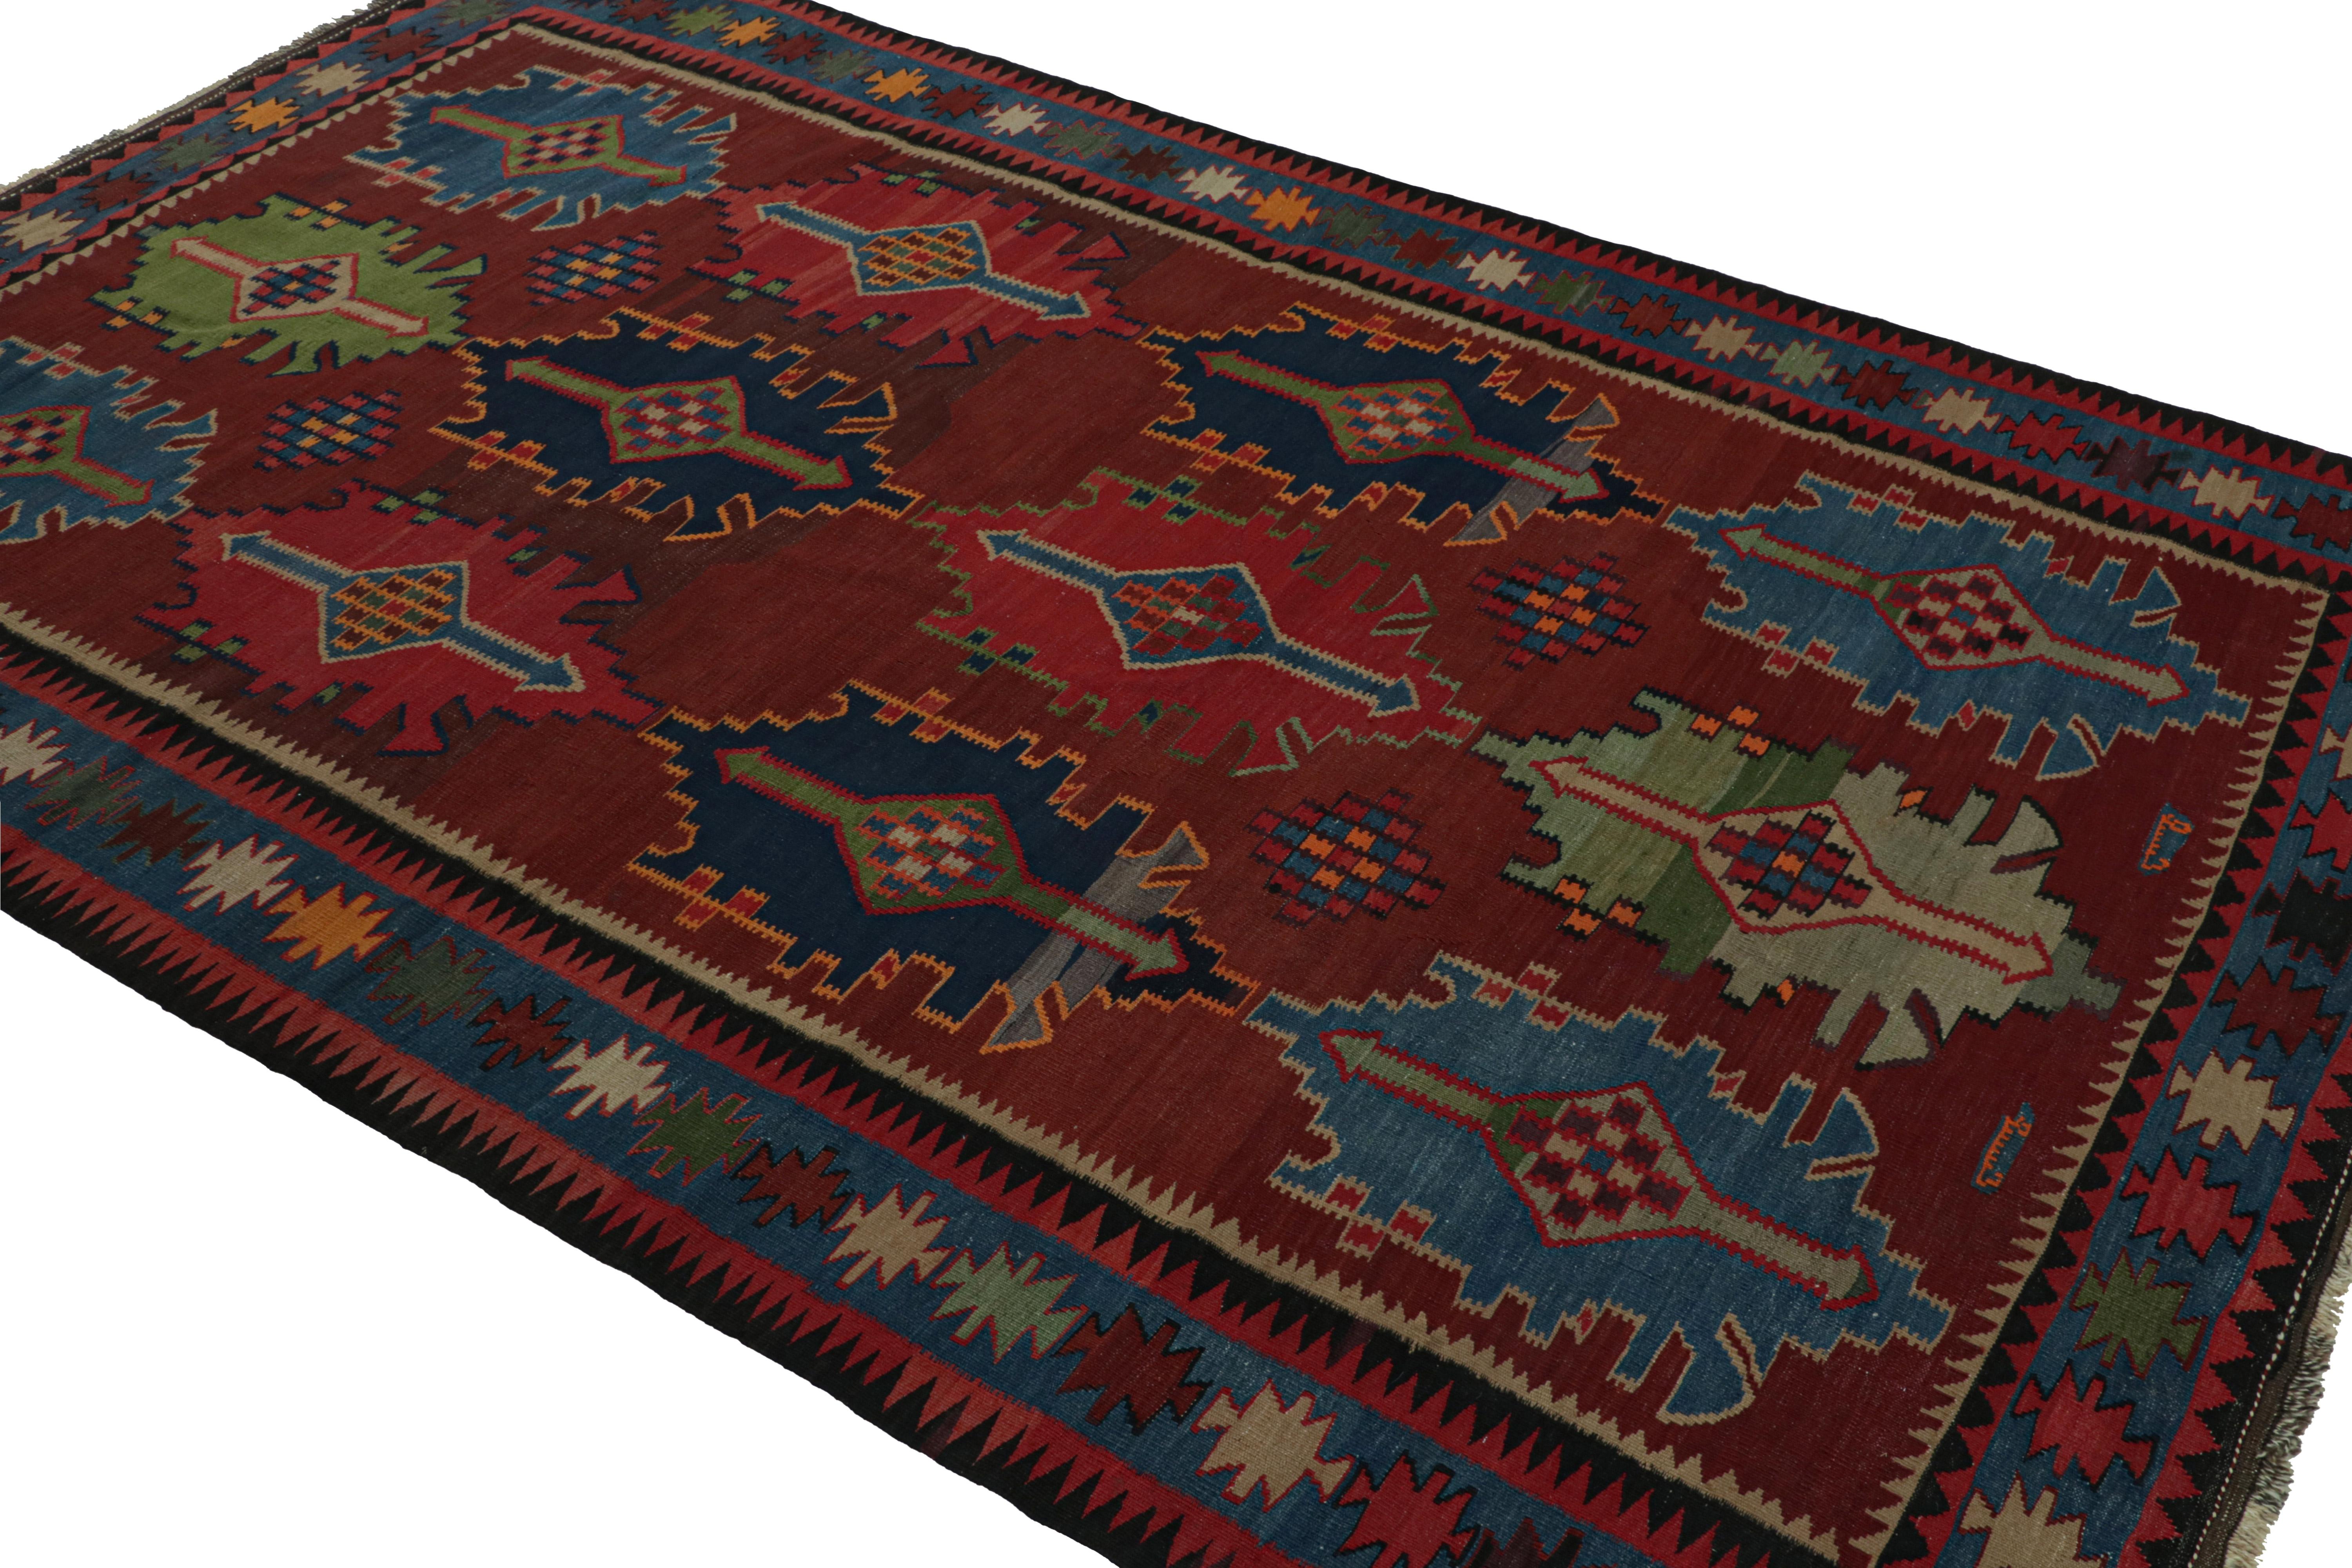 Exemplary of nomadic design, this 6x9 vintage Afghan tribal kilim rug, handwoven in wool with a red field, features a rare design with large scale patterns and vibrant colorway. 

On the design: 

Connoisseurs will admire the design of this kilim as